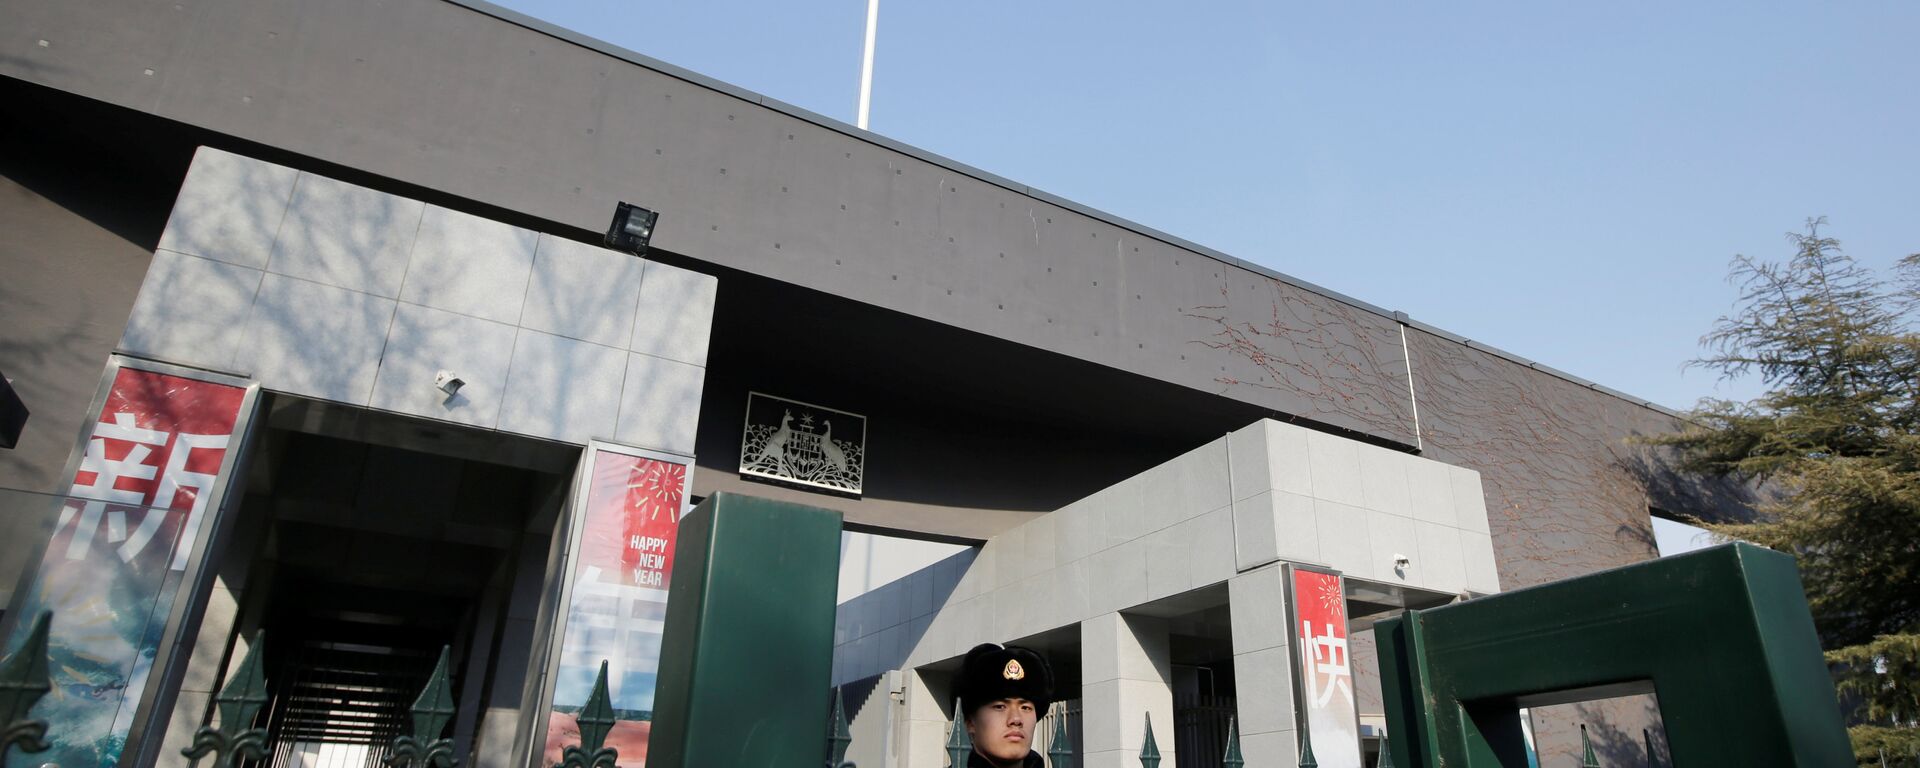 A paramilitary policeman stands guard at the Australian embassy in Beijing, China January 24, 2019. - 俄羅斯衛星通訊社, 1920, 24.01.2019